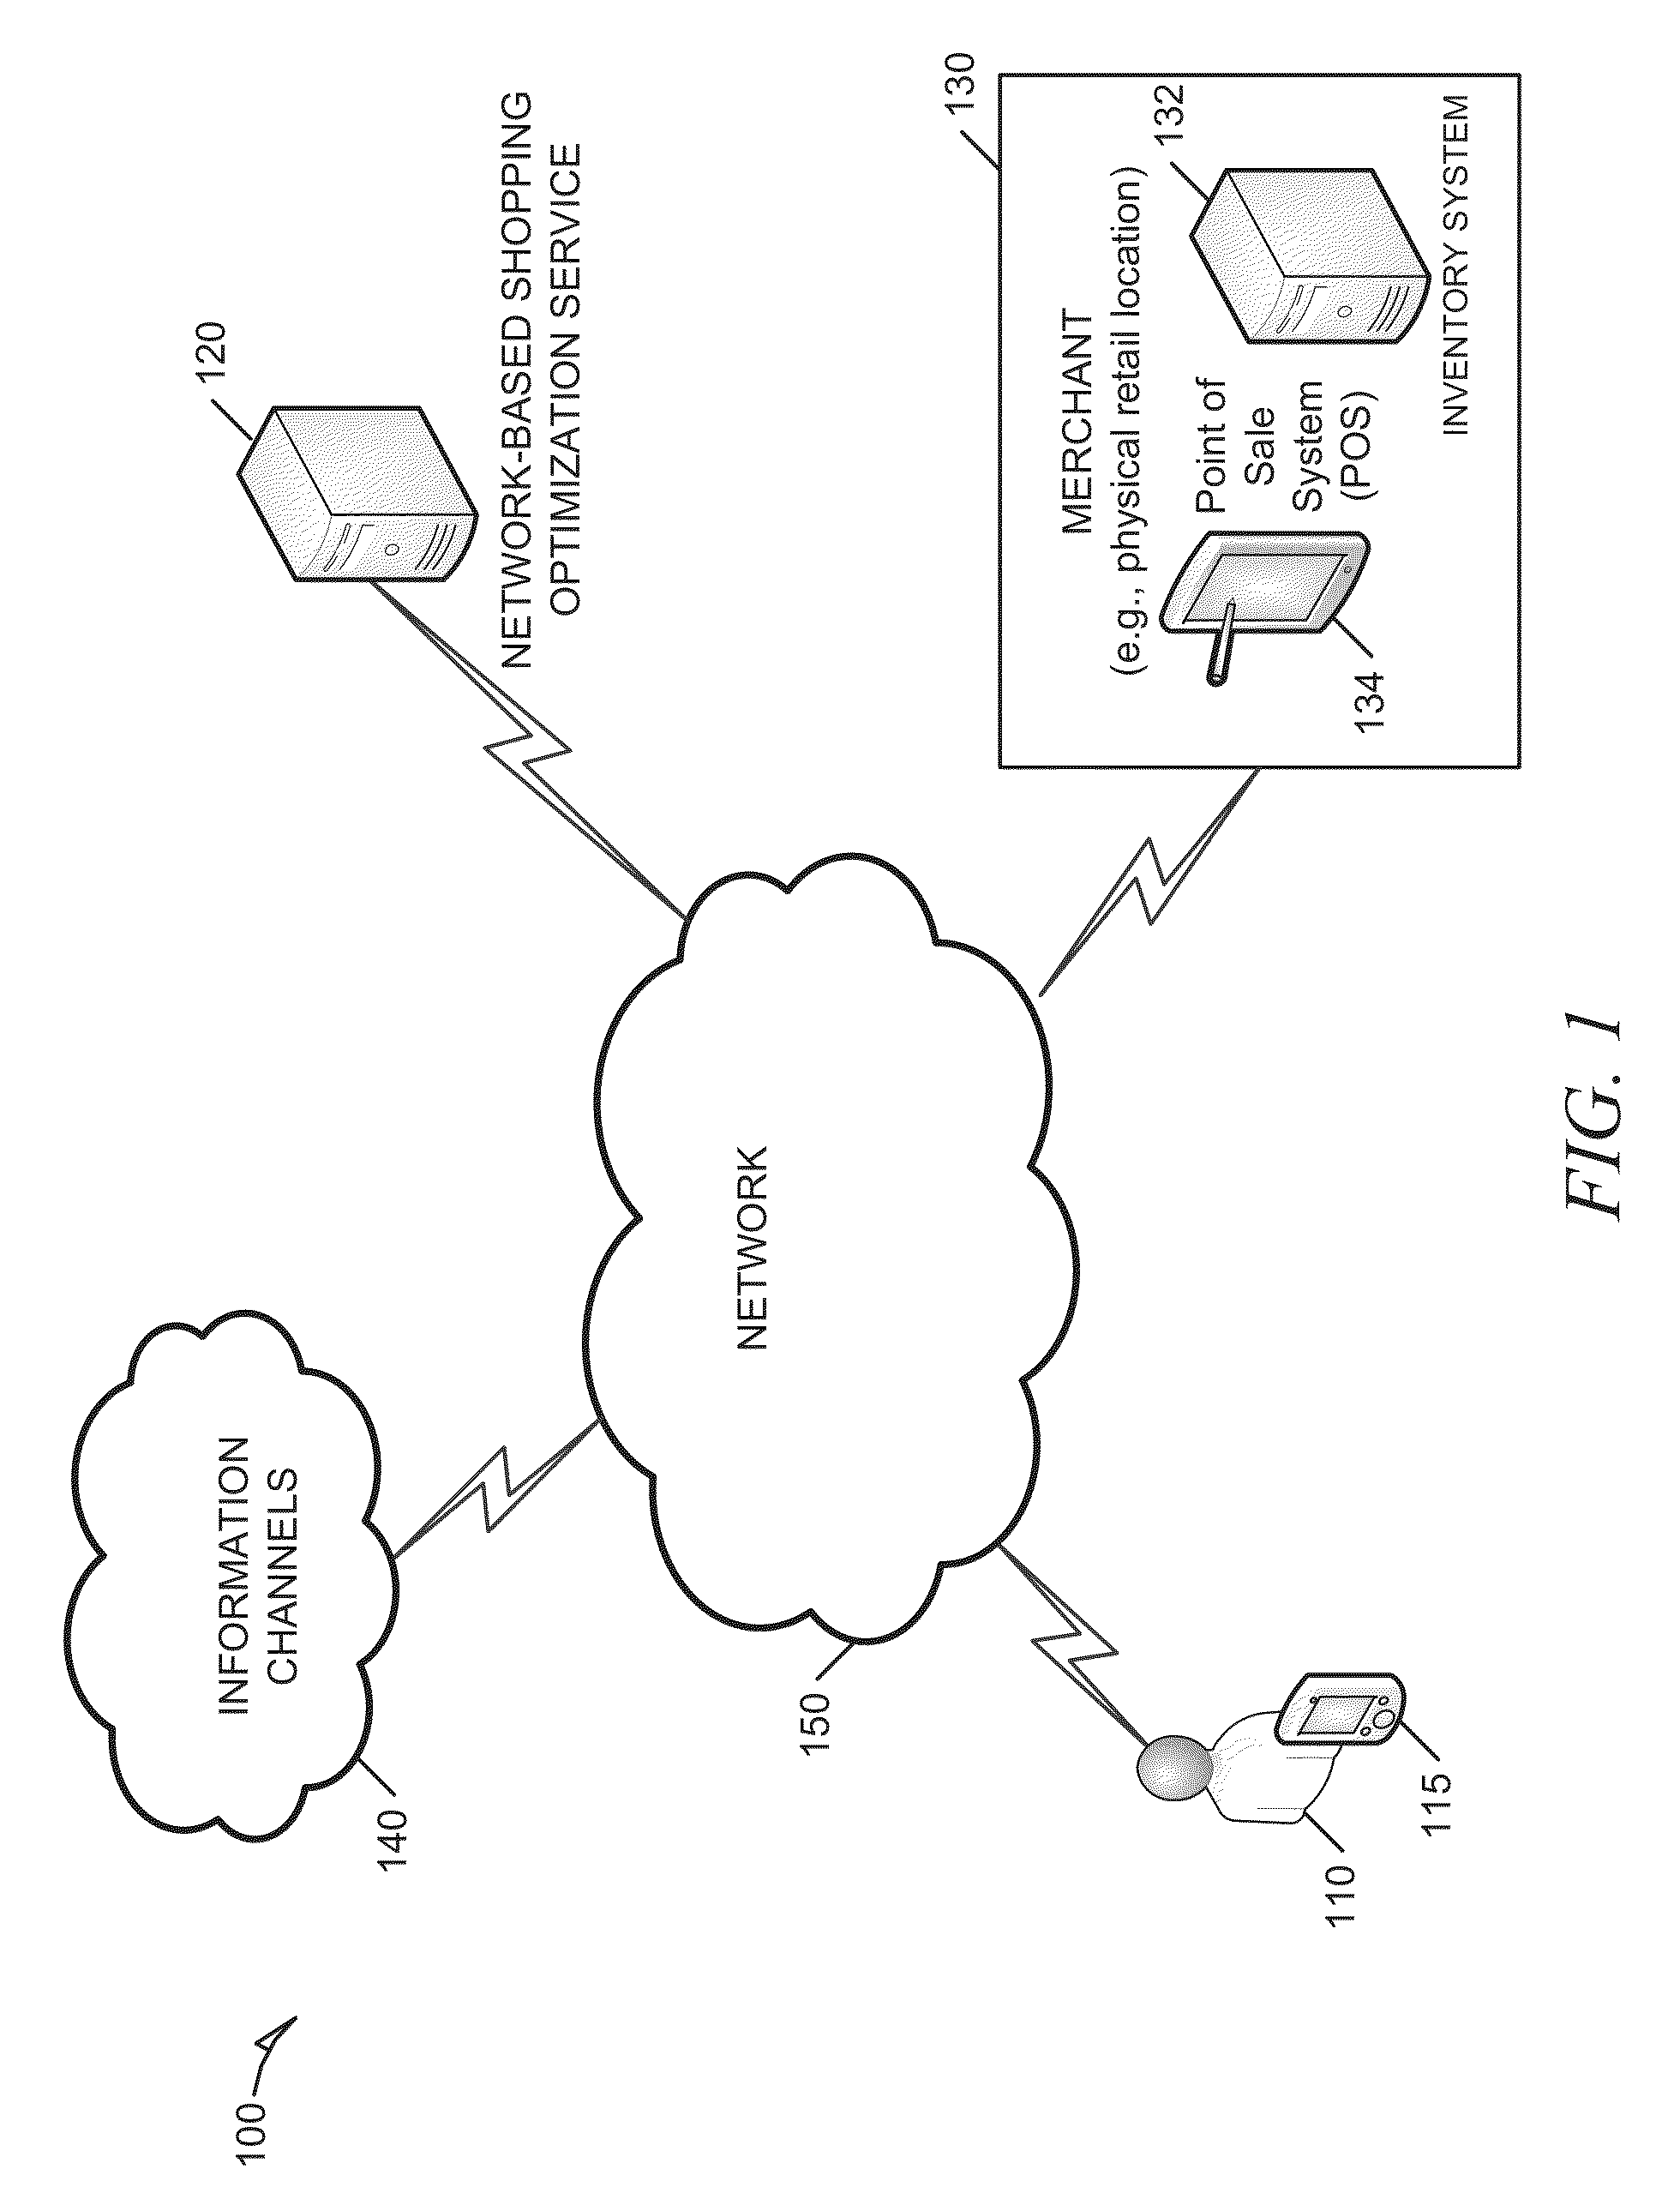 Method, system, and medium for generating a mobile interface indicating traffic level for local merchants